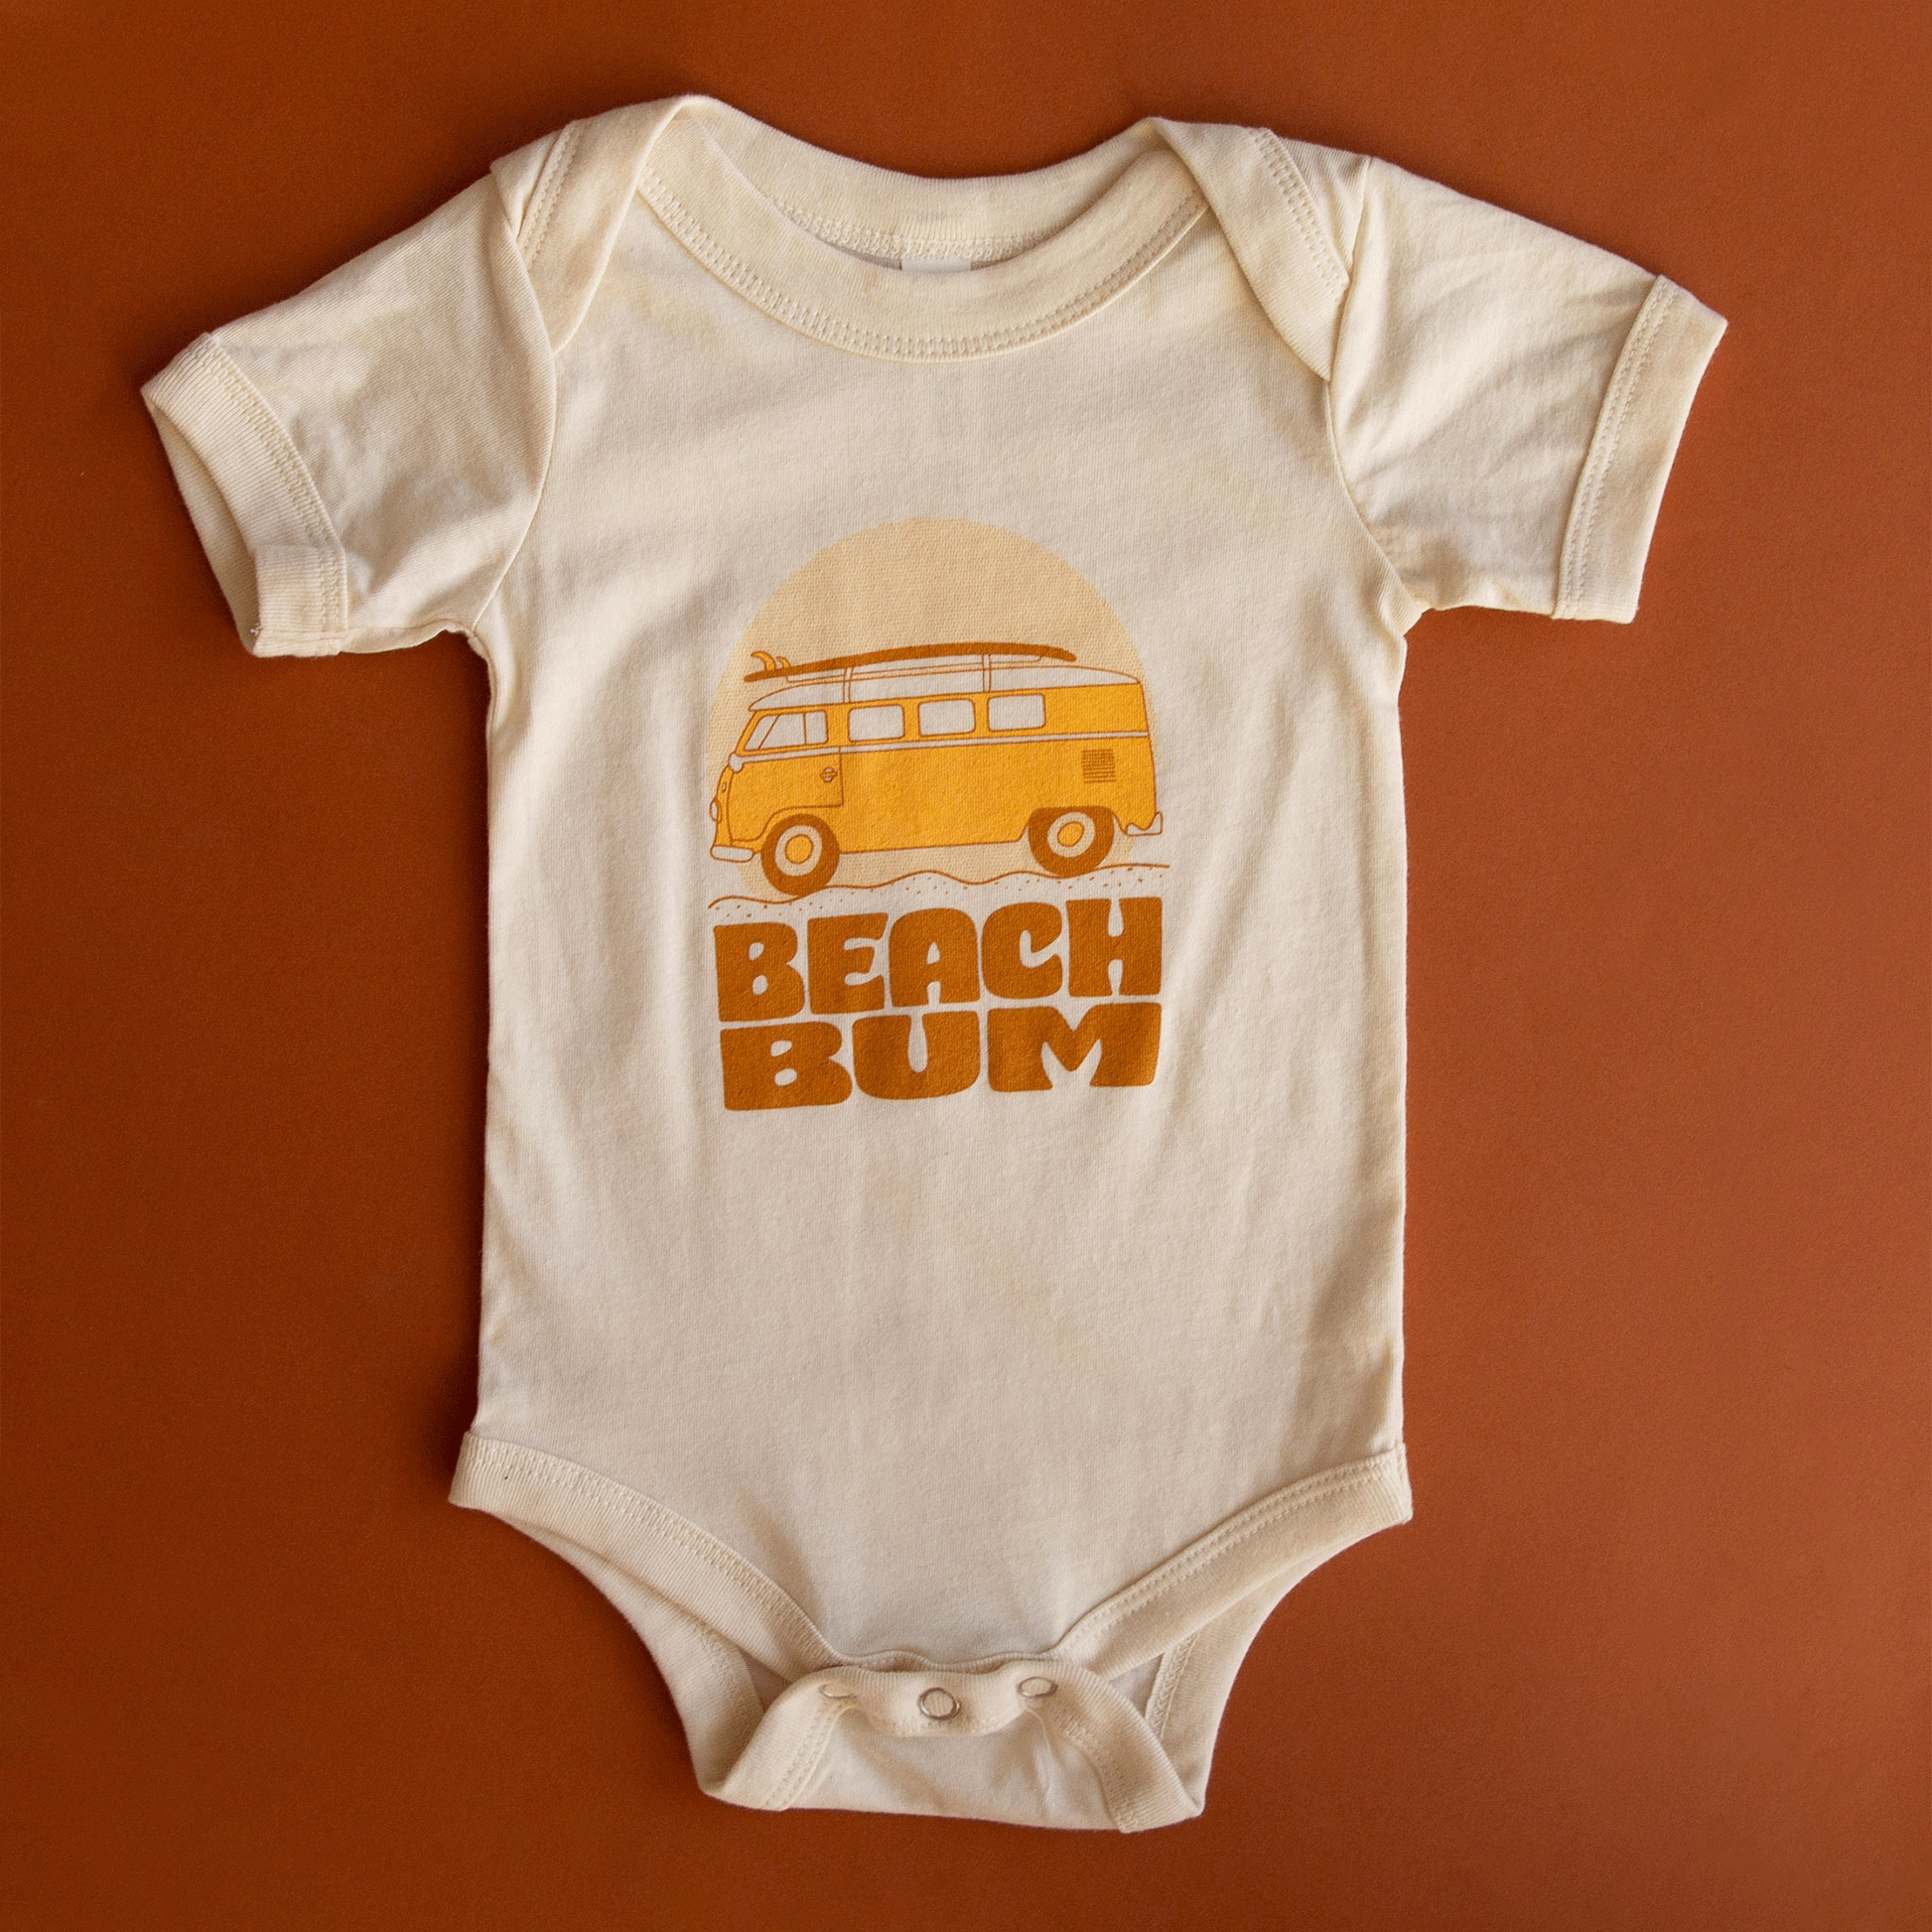 A white cotton onesie with an orange VW bus lined with surfboards and the writing "Beach Bum" in a burnt orange shade.